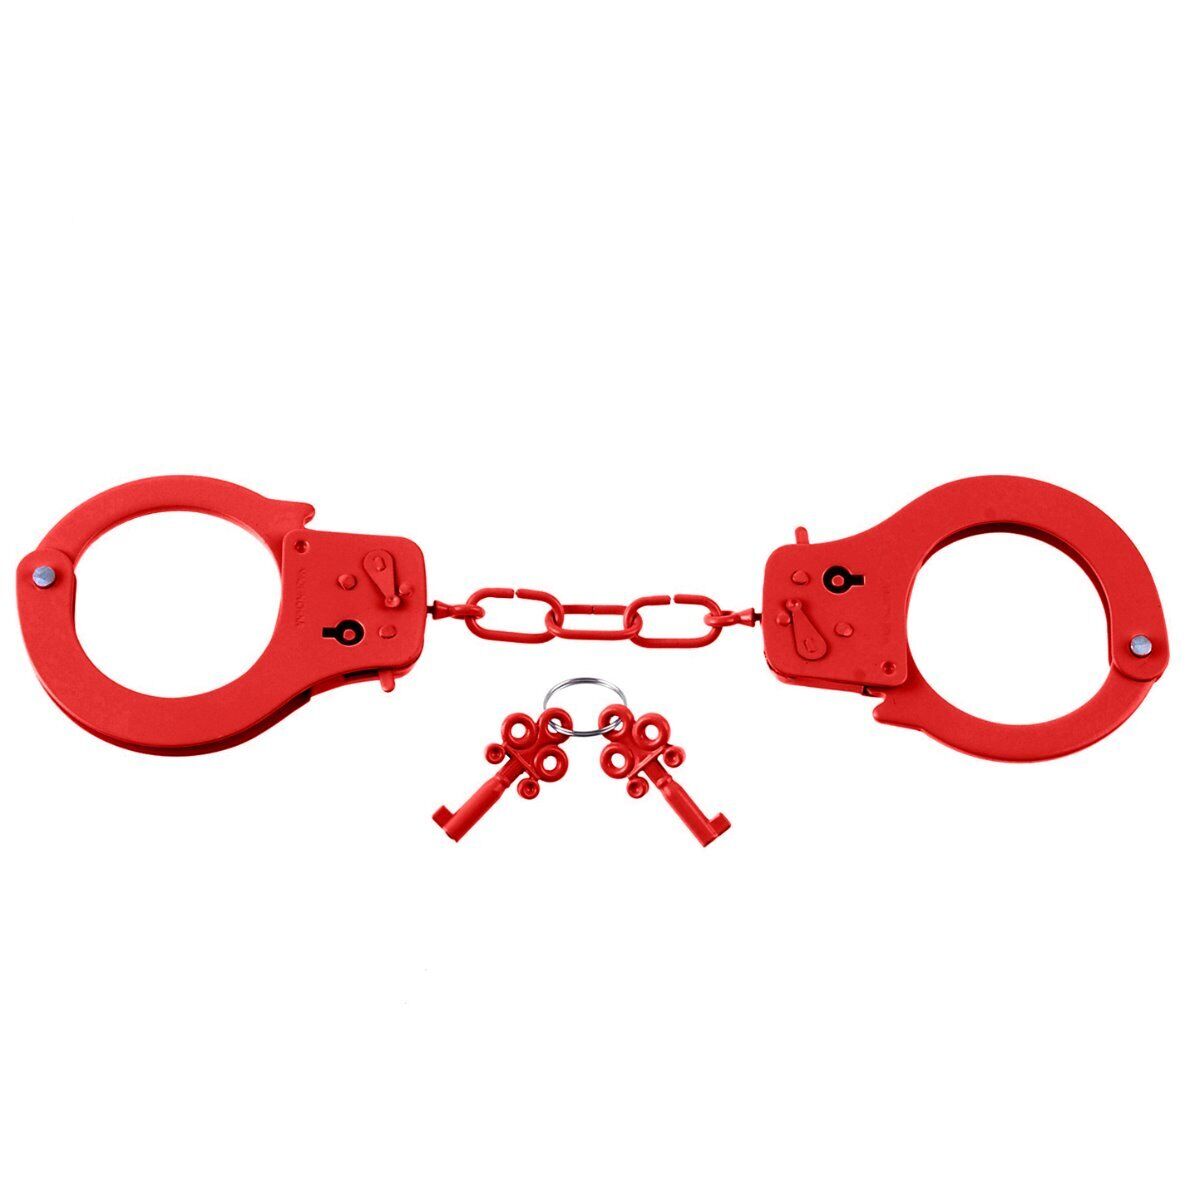 Red Steel Metal Handcuffs Restraints Wrist Cuffs Not for Professional Use